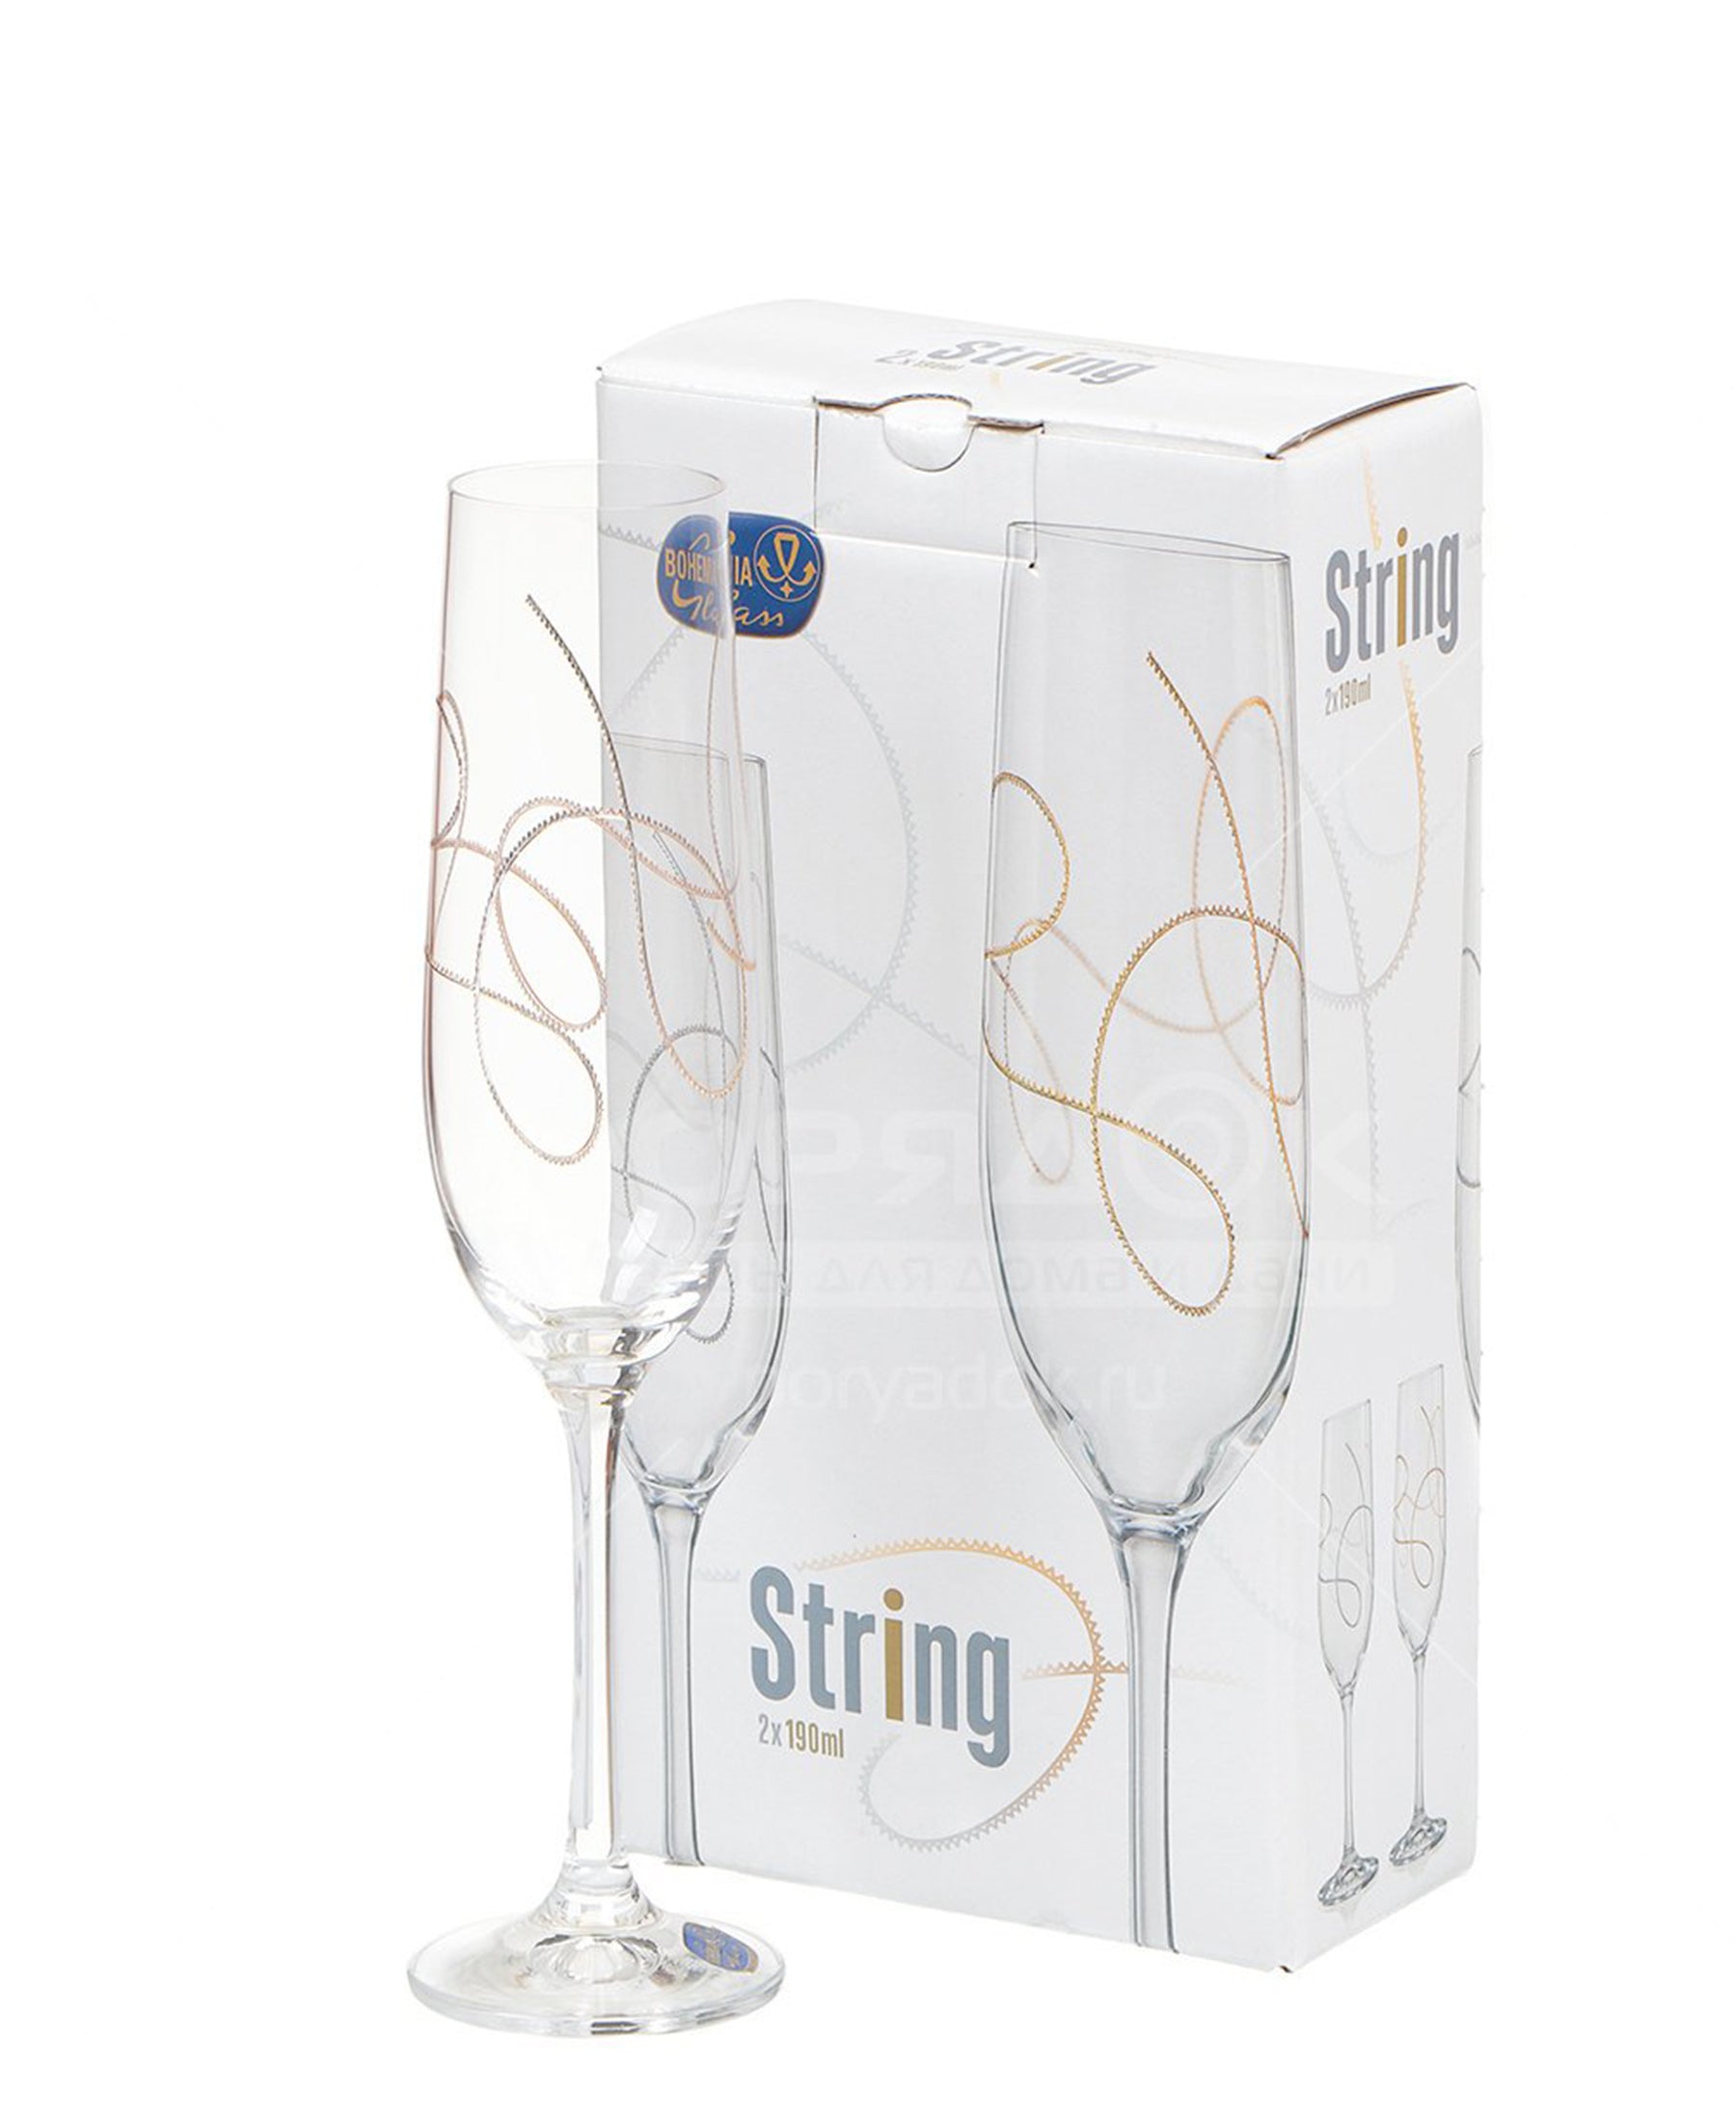 Eetrite 2 Piece Viola Flute 190ml Glasses - Clear With String Print